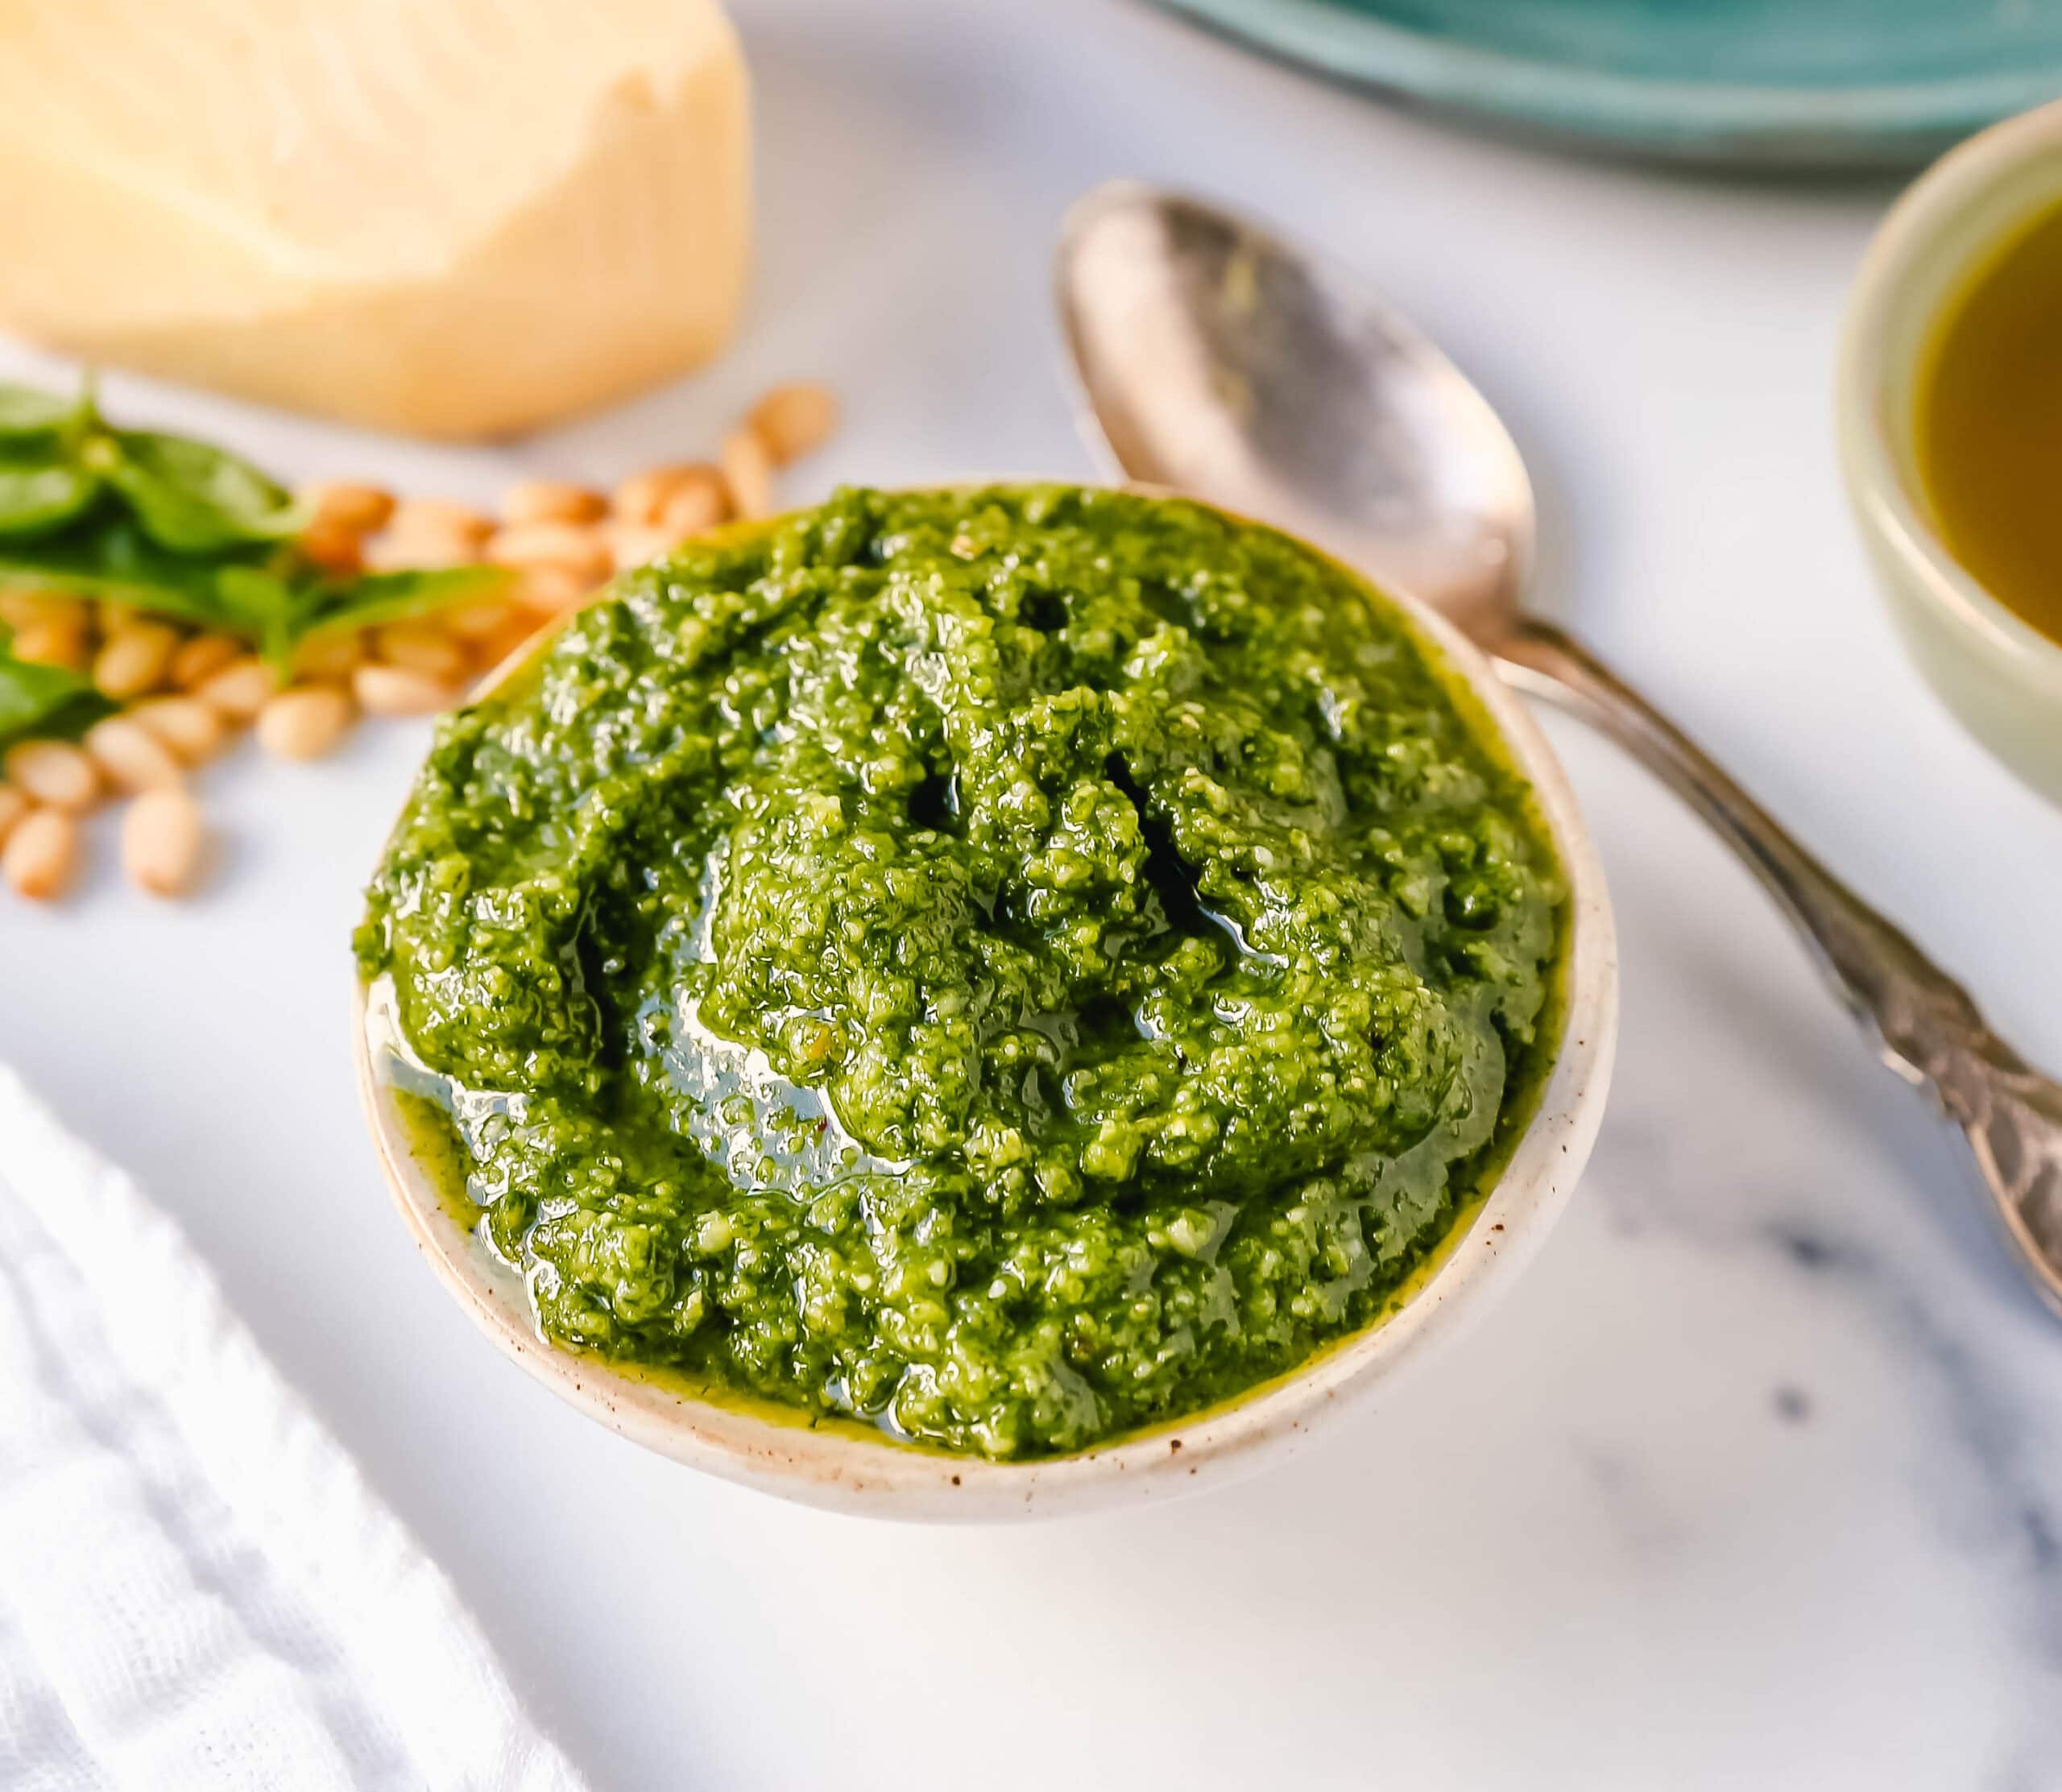 Homemade Basil Pesto Sauce made with fresh basil, extra-virgin olive oil, pine nuts, garlic, parmesan cheese, and salt and pepper. This pesto sauce is the best recipe and can be used on pasta, pizza, sandwiches, or to be used as a dip with rustic French bread.